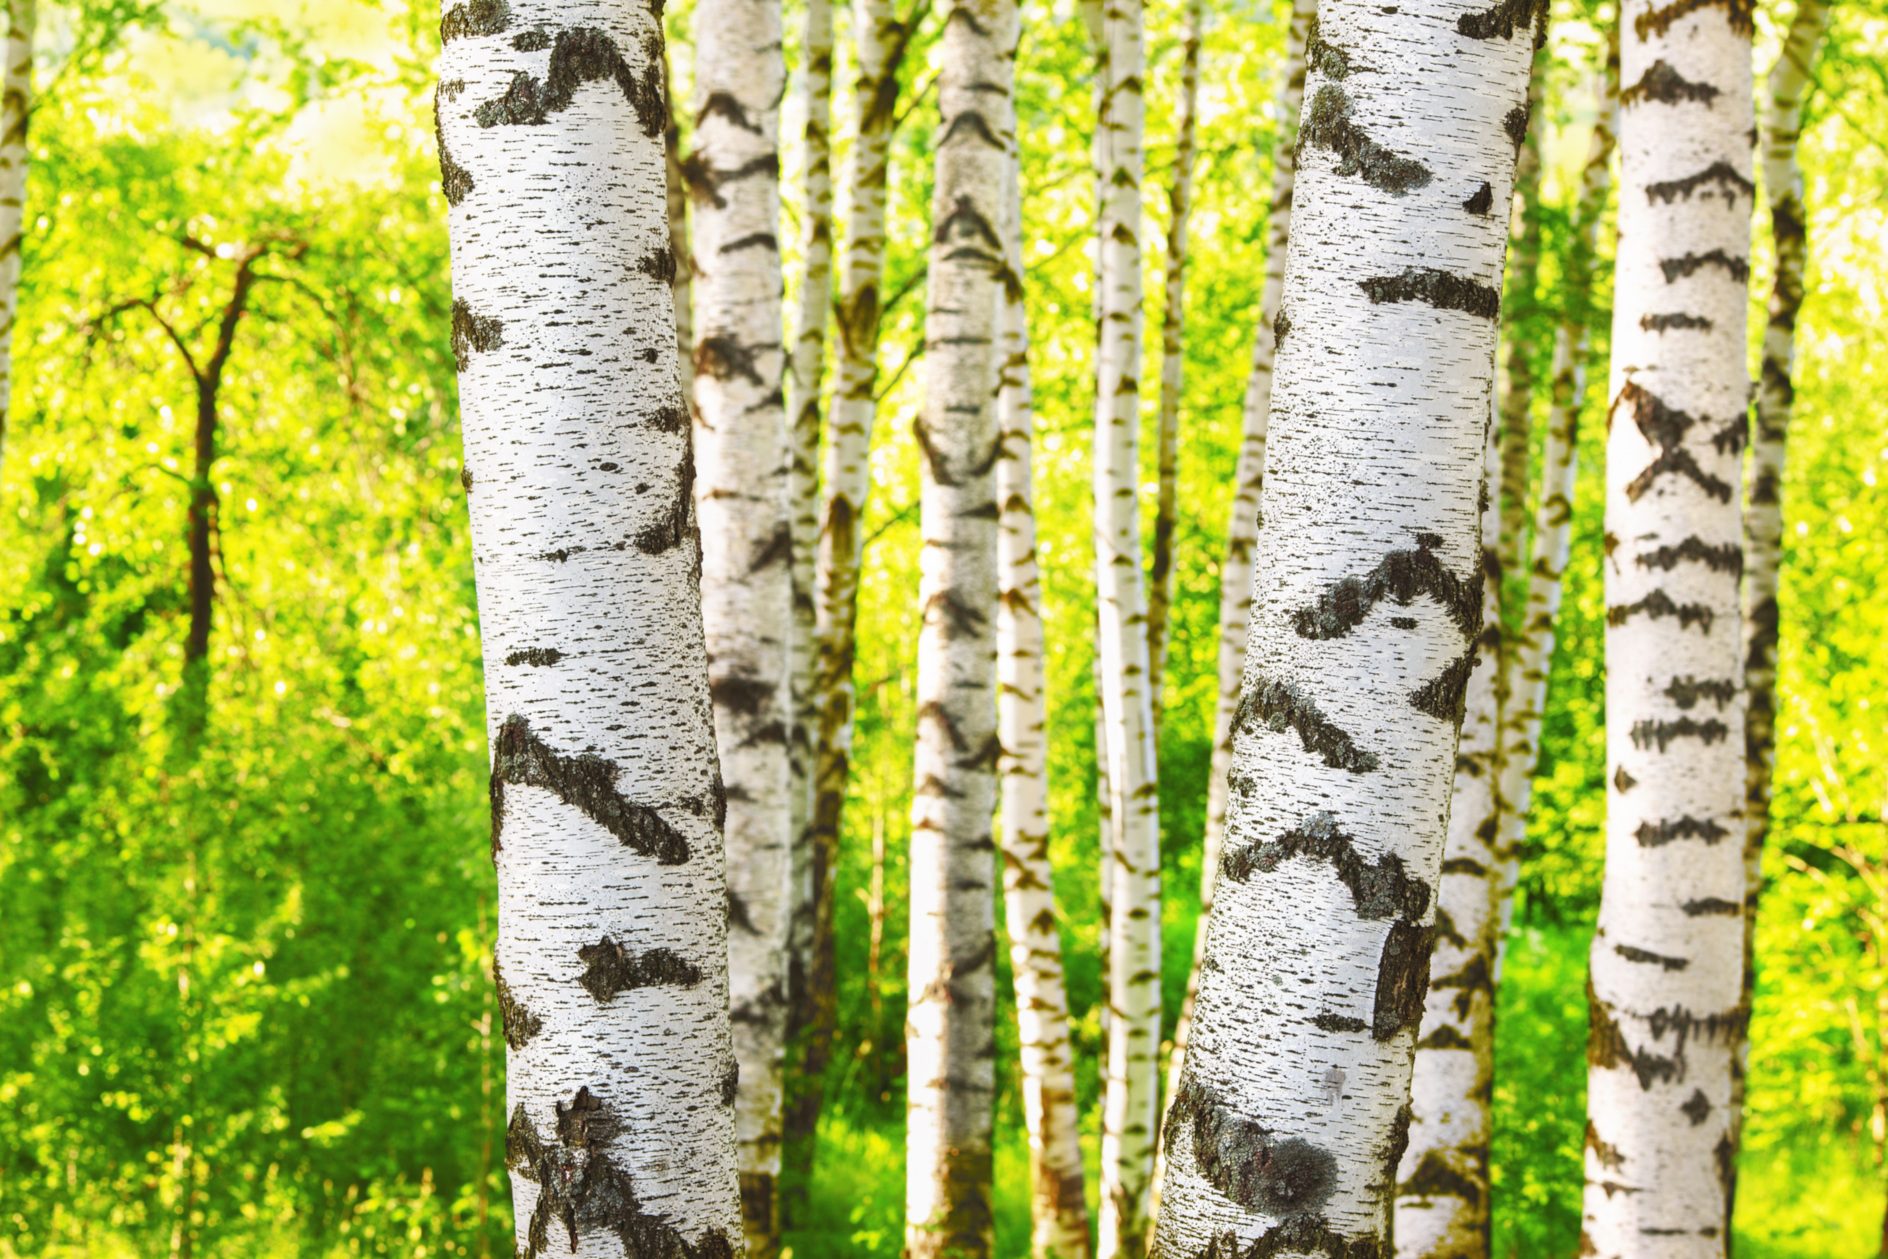 Soil treatment with plants Birch trees pull microplastics from the ground